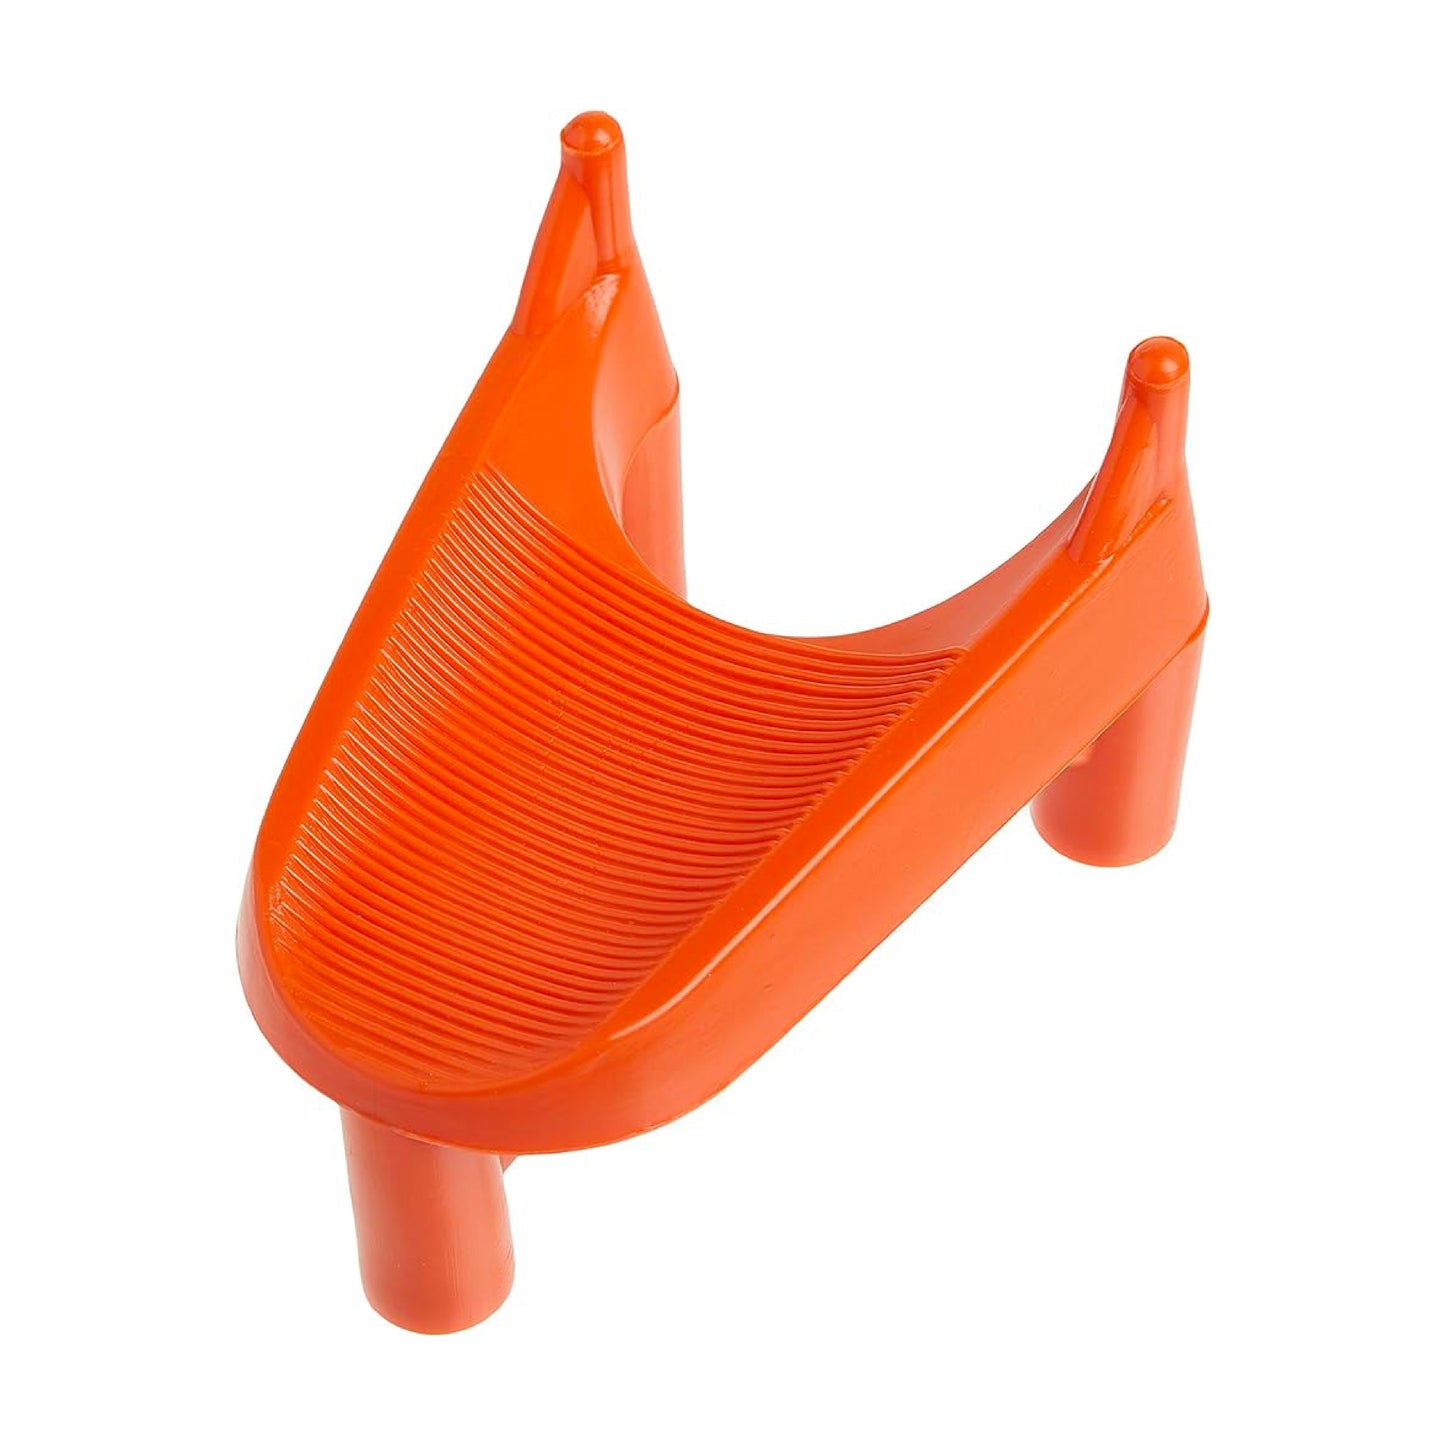 Orange Hard Rubber Kicking Tee - Perfect for use or to display Full Size or Mini Footballs